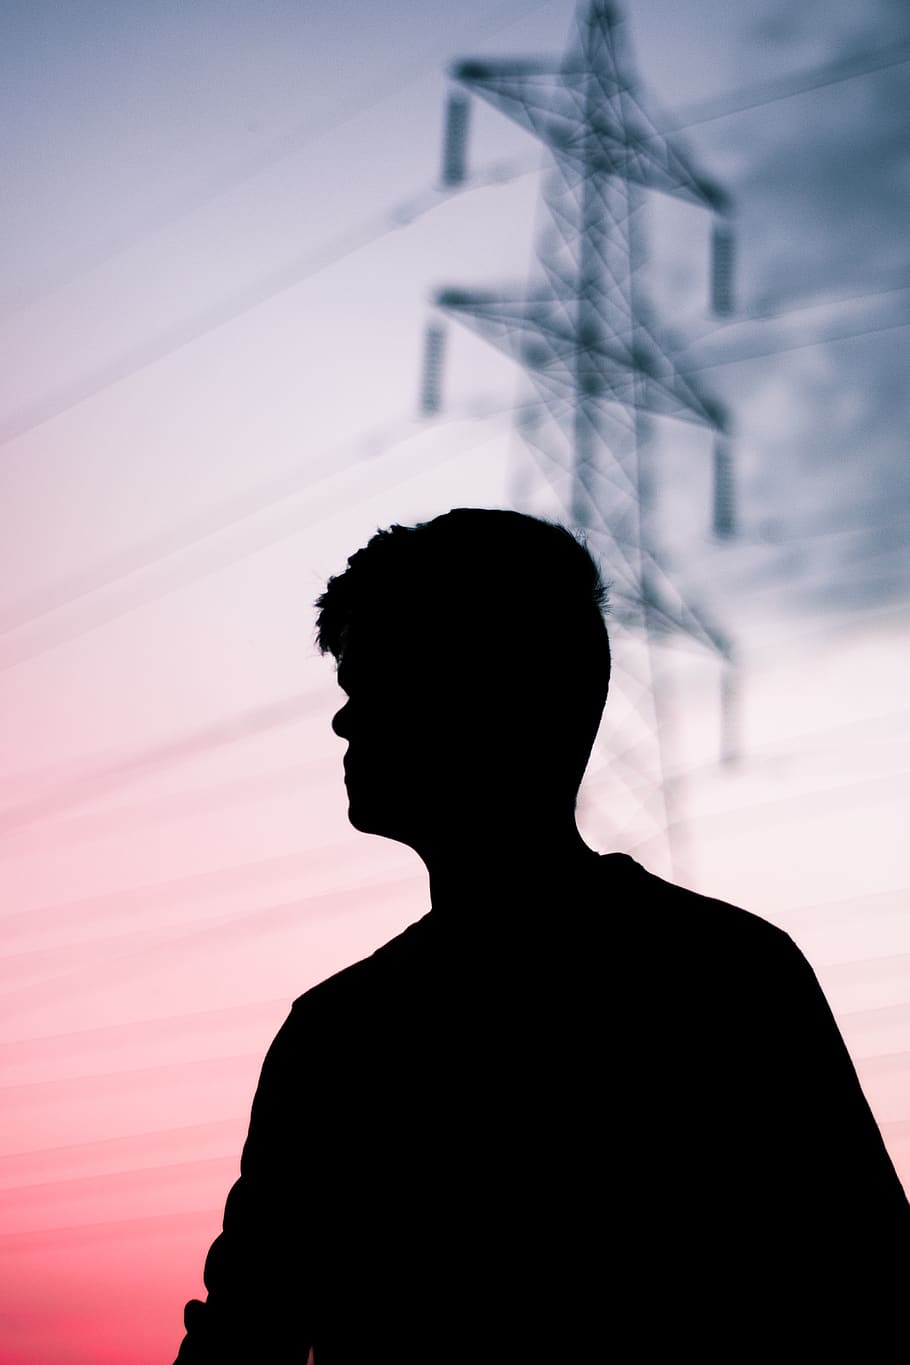 Hd Wallpaper Silhouette Photography Of Man Human Person Cable Iphone Background Iphone Wallpapers Hd Wallpaper Iphone X Wallpaper Iphone Xs Wallpaper Ios Wallpaper Nature Nature Wallpaper Wallpaper Flare